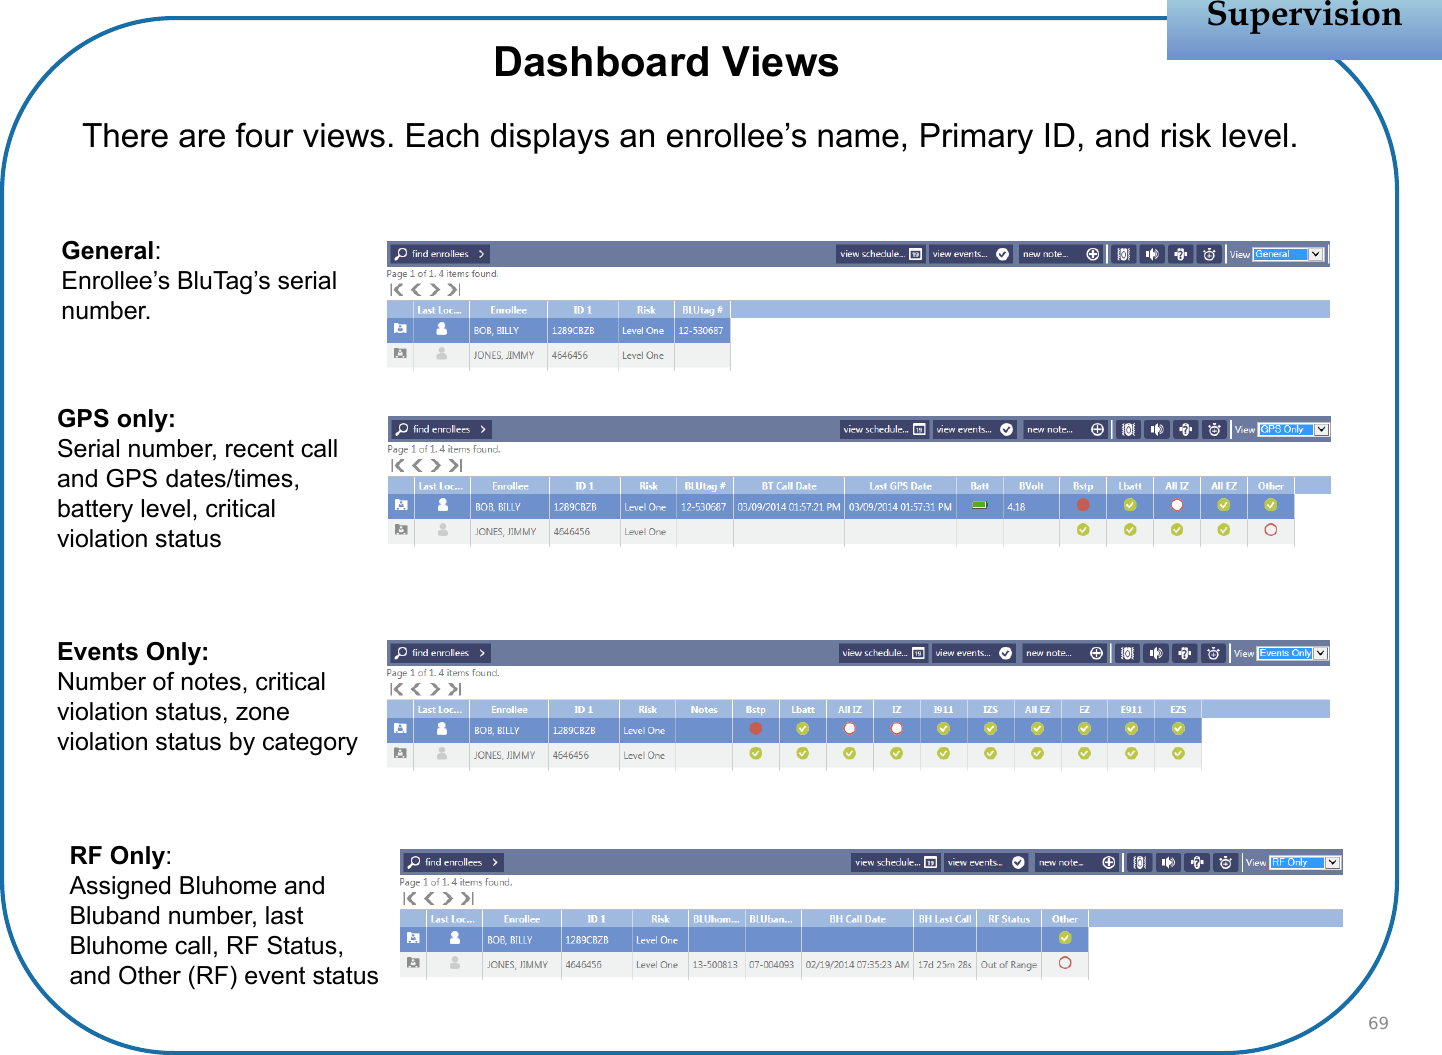 Dashboard ViewsSupervisionSupervisionThere are four views. Each displays an enrollee’s name, Primary ID, and risk level.General:Enrollee’s BluTag’s serial number.GPS only:Serial number, recent call and GPS dates/times, battery level, critical violation statusEvents Only:Number of notes, critical violation status, zone violation status by categoryRF Only:Assigned Bluhome and Bluband number, last Bluhome call, RF Status, and Other (RF) event status69